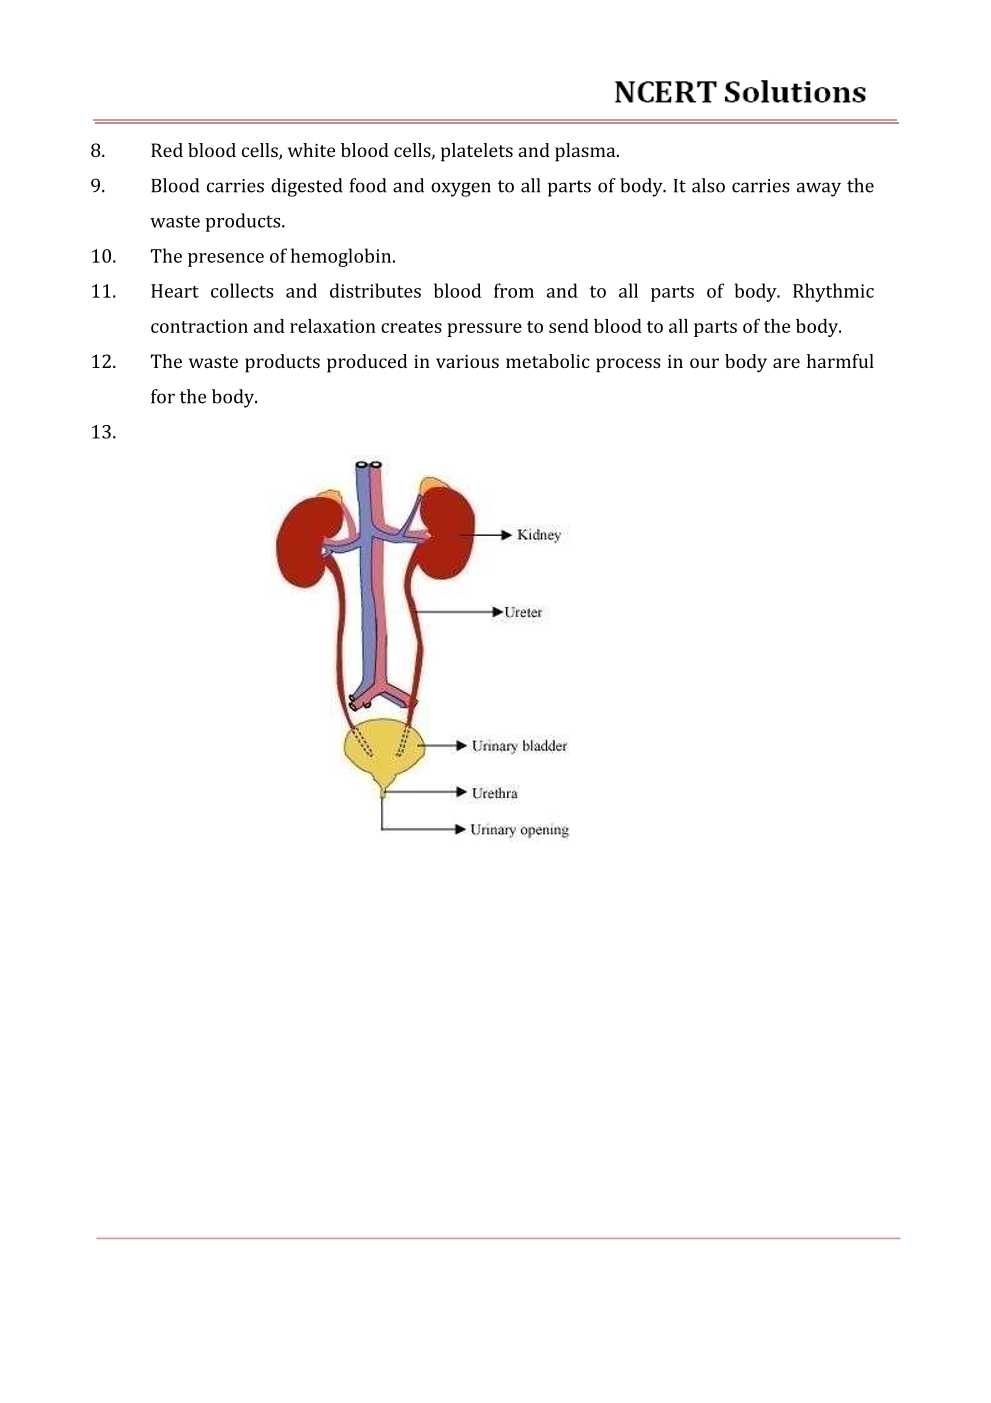 NCERT Solutions For Class 7 science Chapter 11 Transportation in Animals and Plants